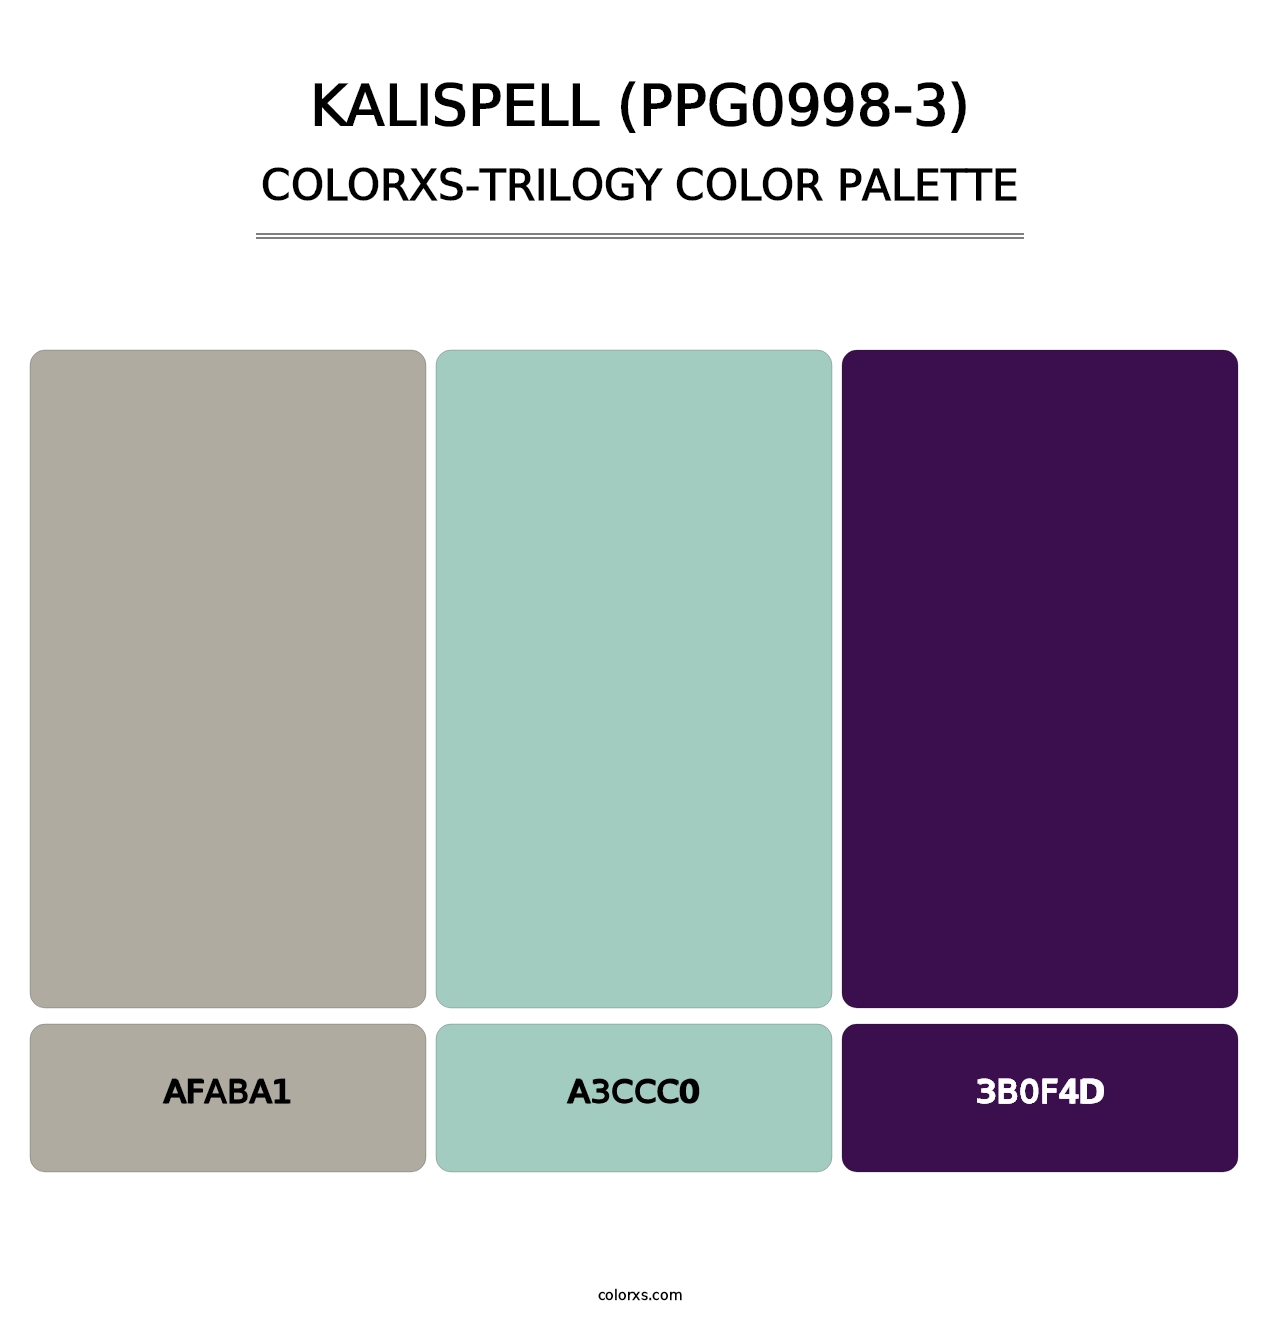 Kalispell (PPG0998-3) - Colorxs Trilogy Palette